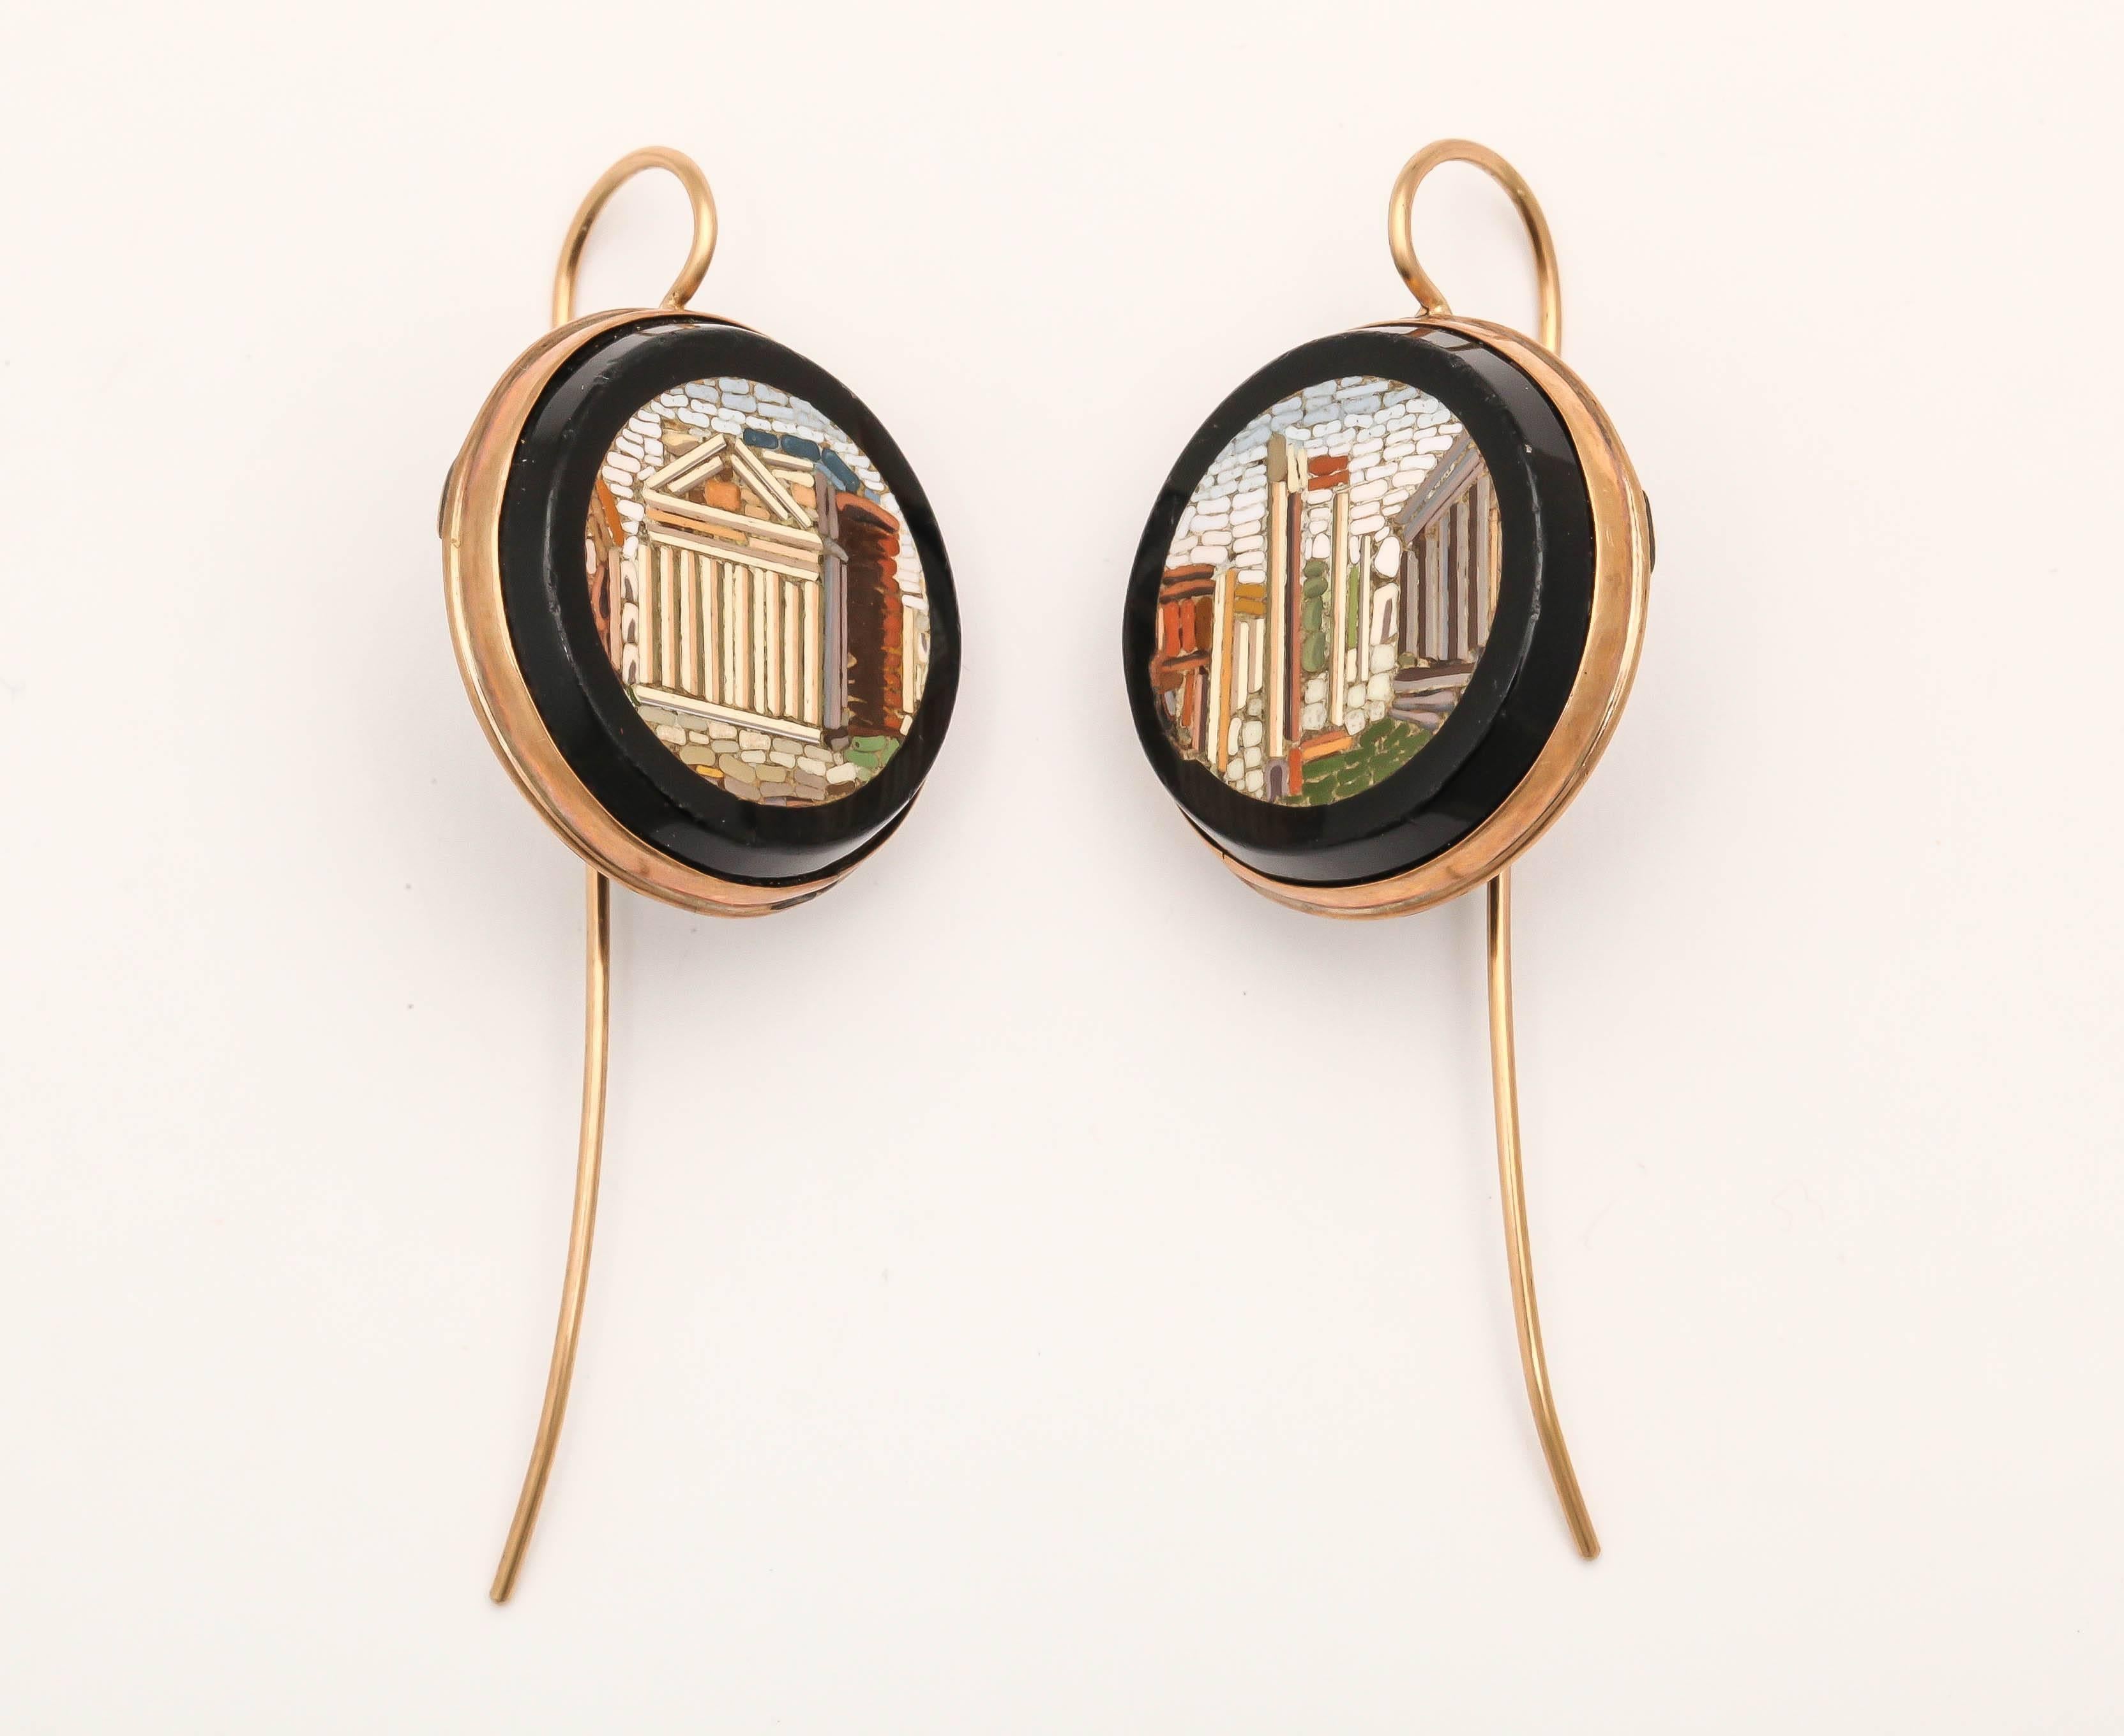 19th Century Micro Mosaic Earrings set in gold with long gold wires.  Scenes of the Colosseum and the Forum.  Very regal - and so  Roman.